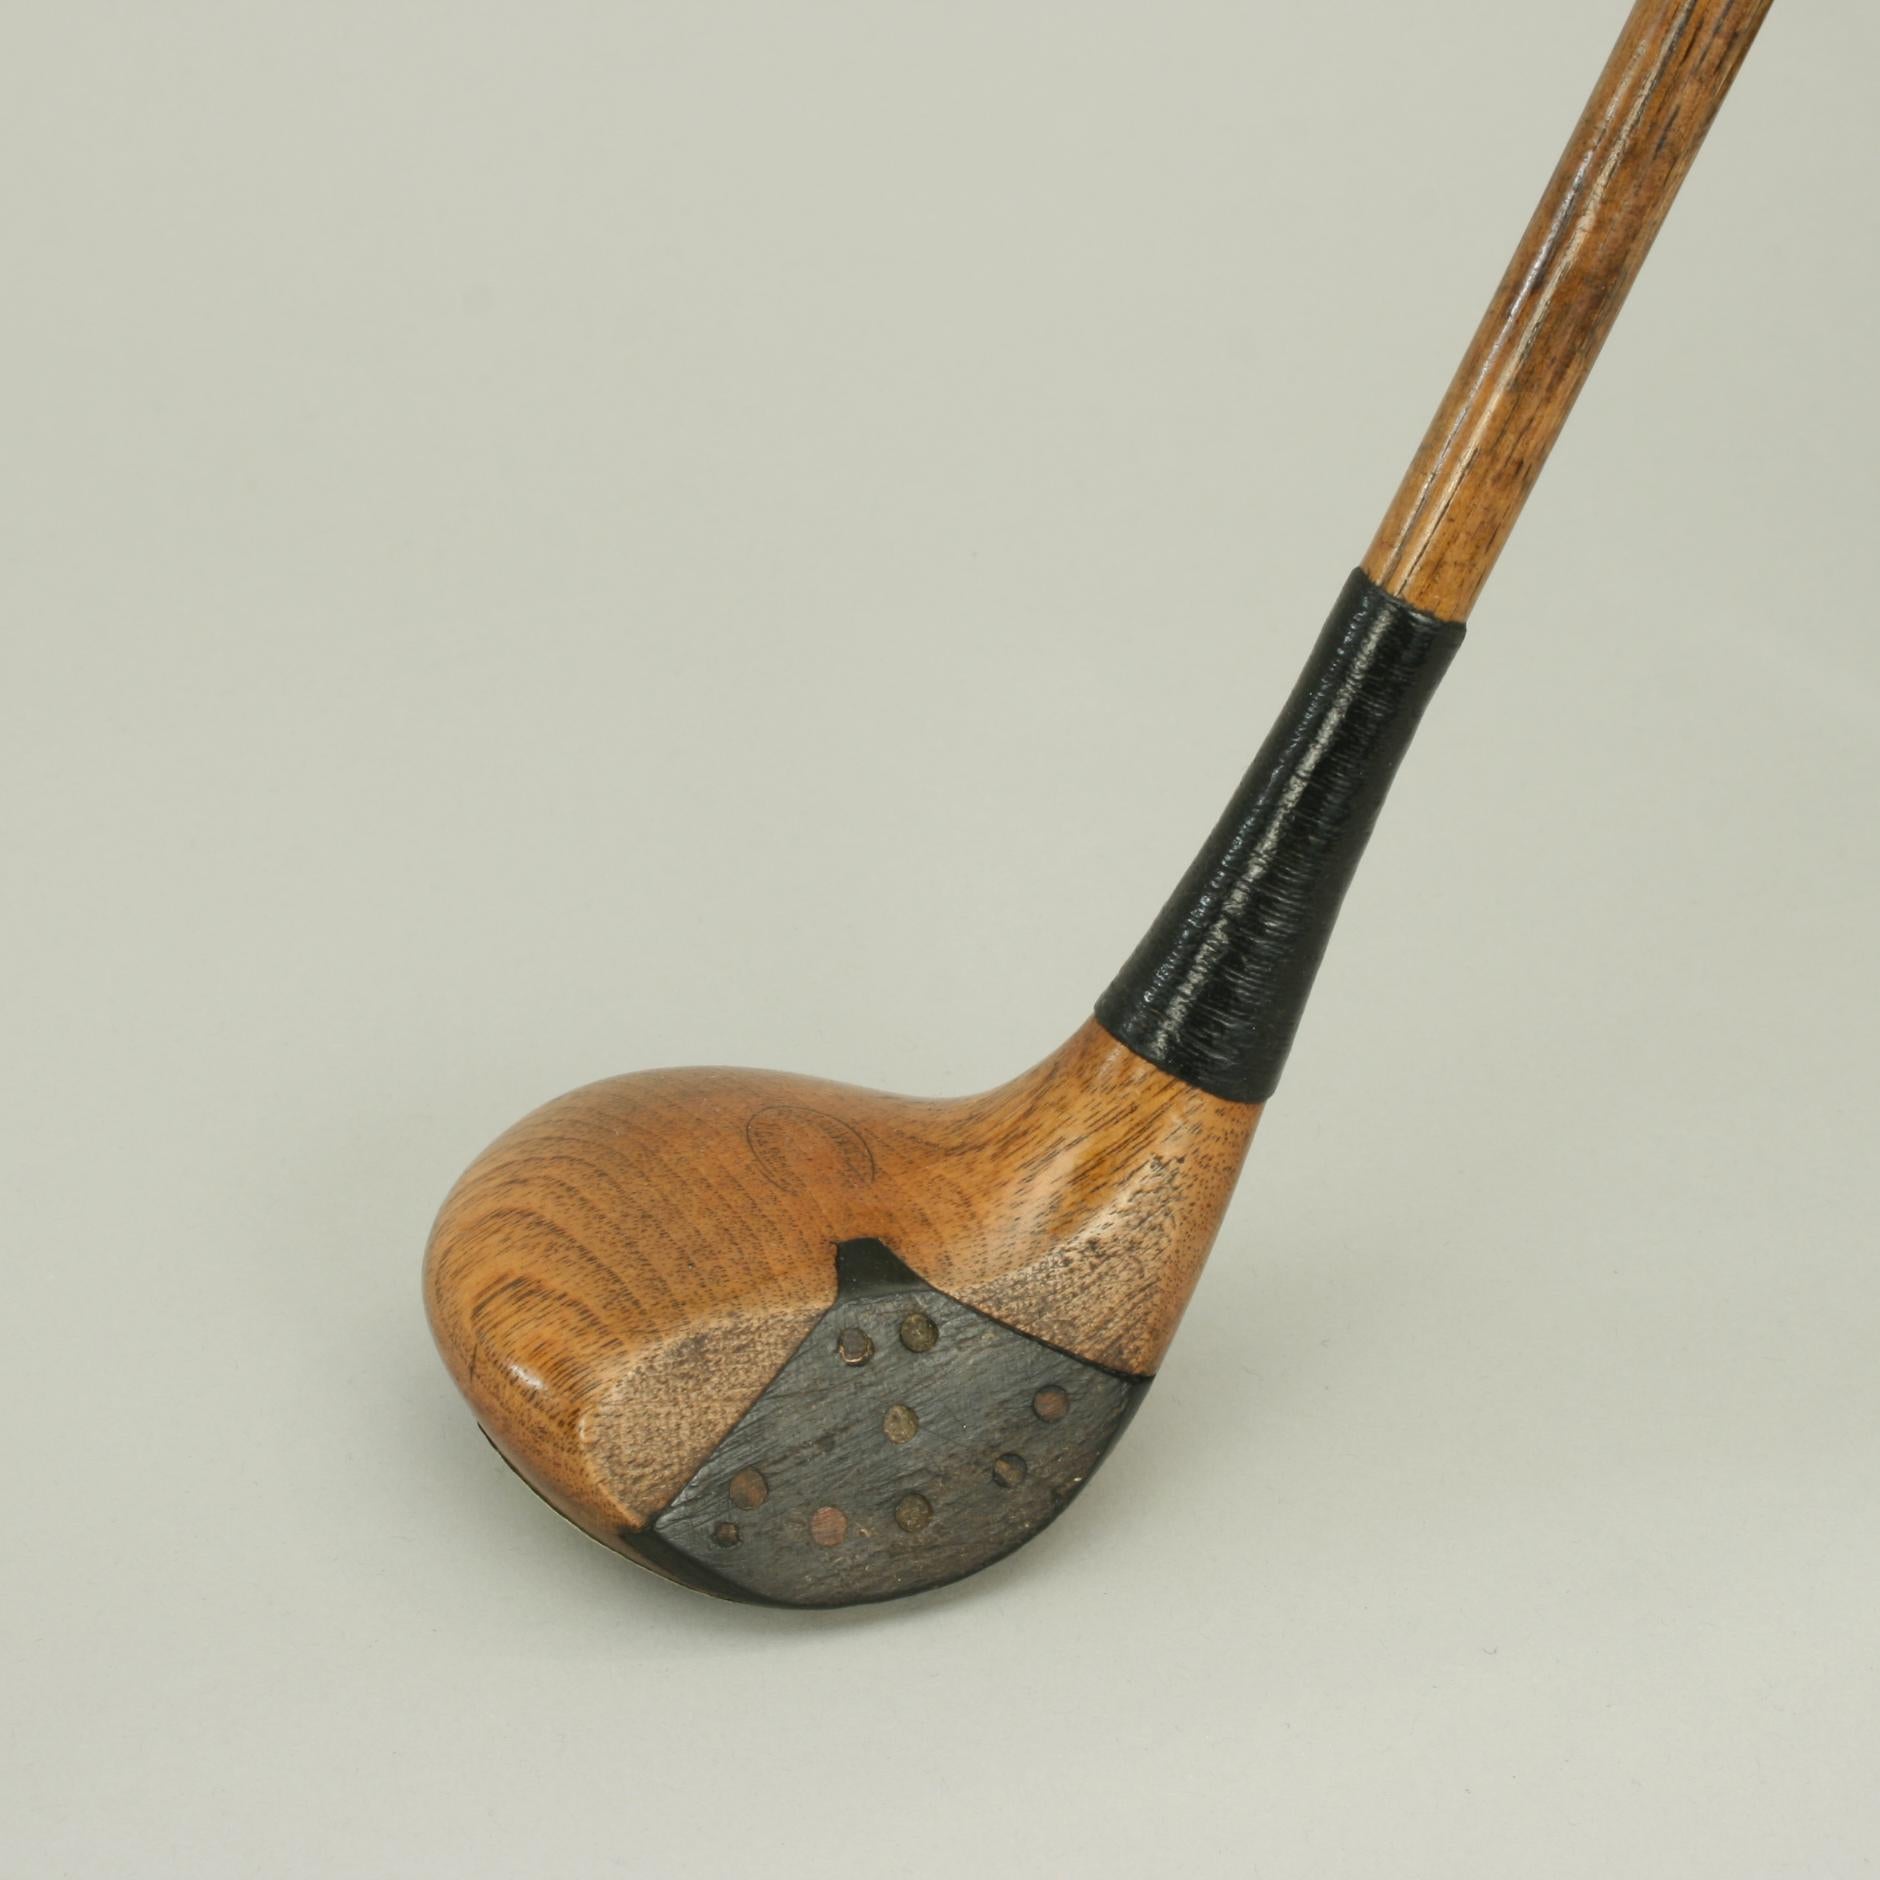 Antique Hickory Golf Club, Brassie with Face Insert and Brass Sole Plate 1